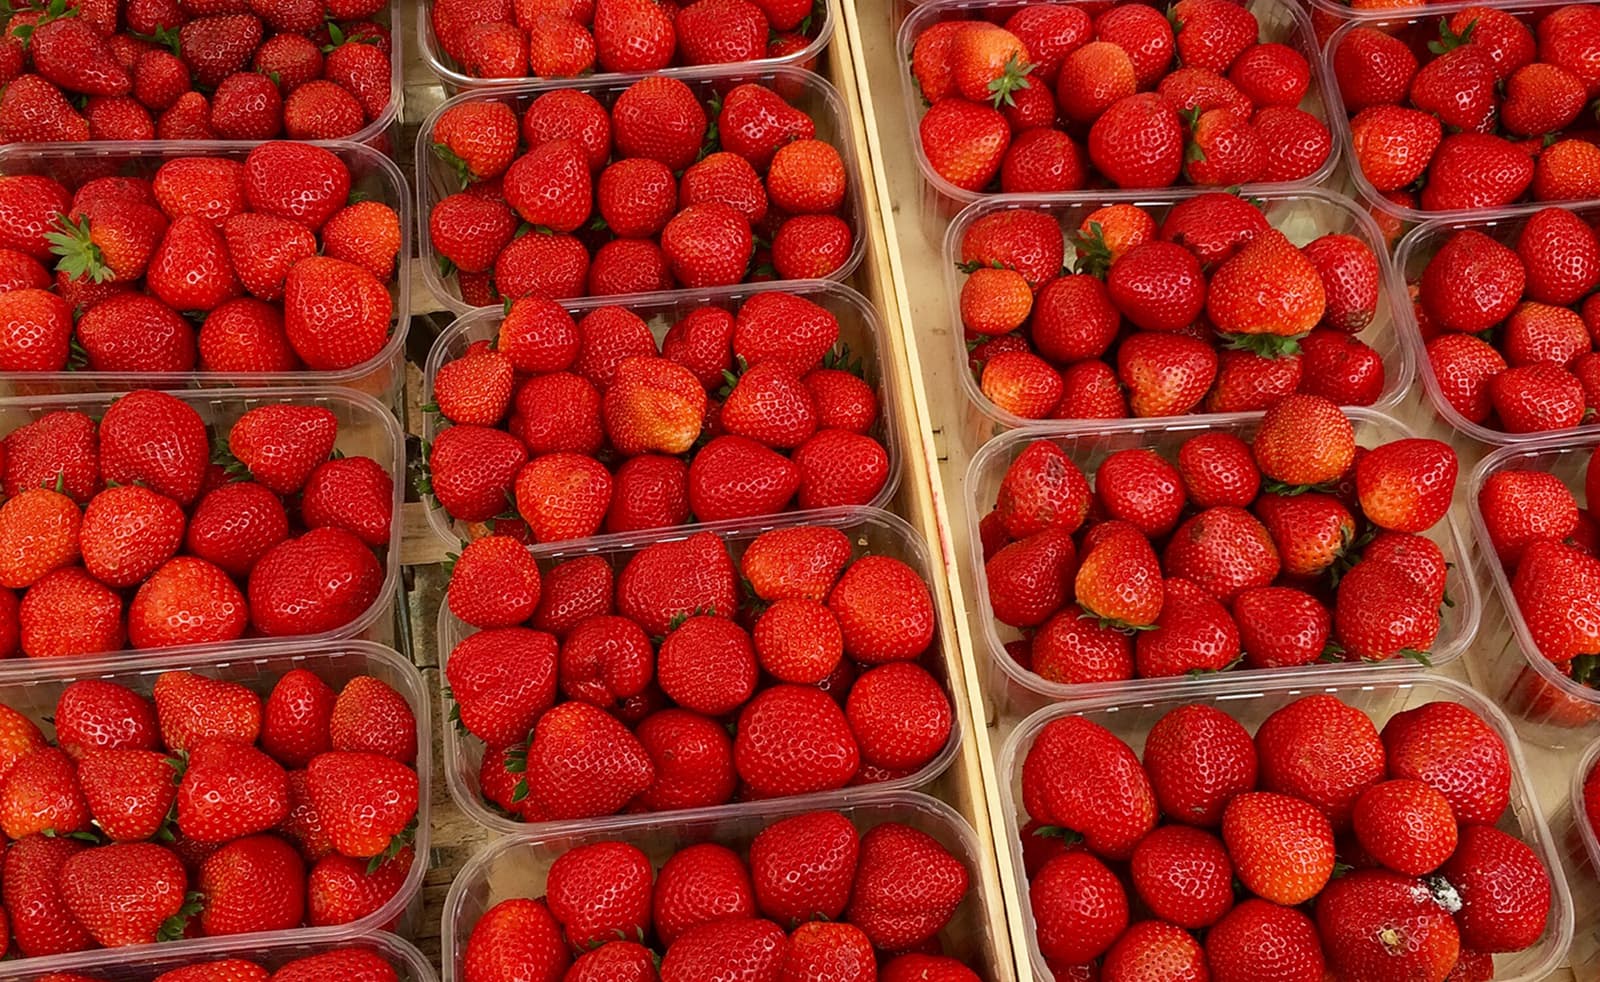 Cartons of strawberries at a French market in Sarlat, France. (Kathy Gunst for Here & Now)